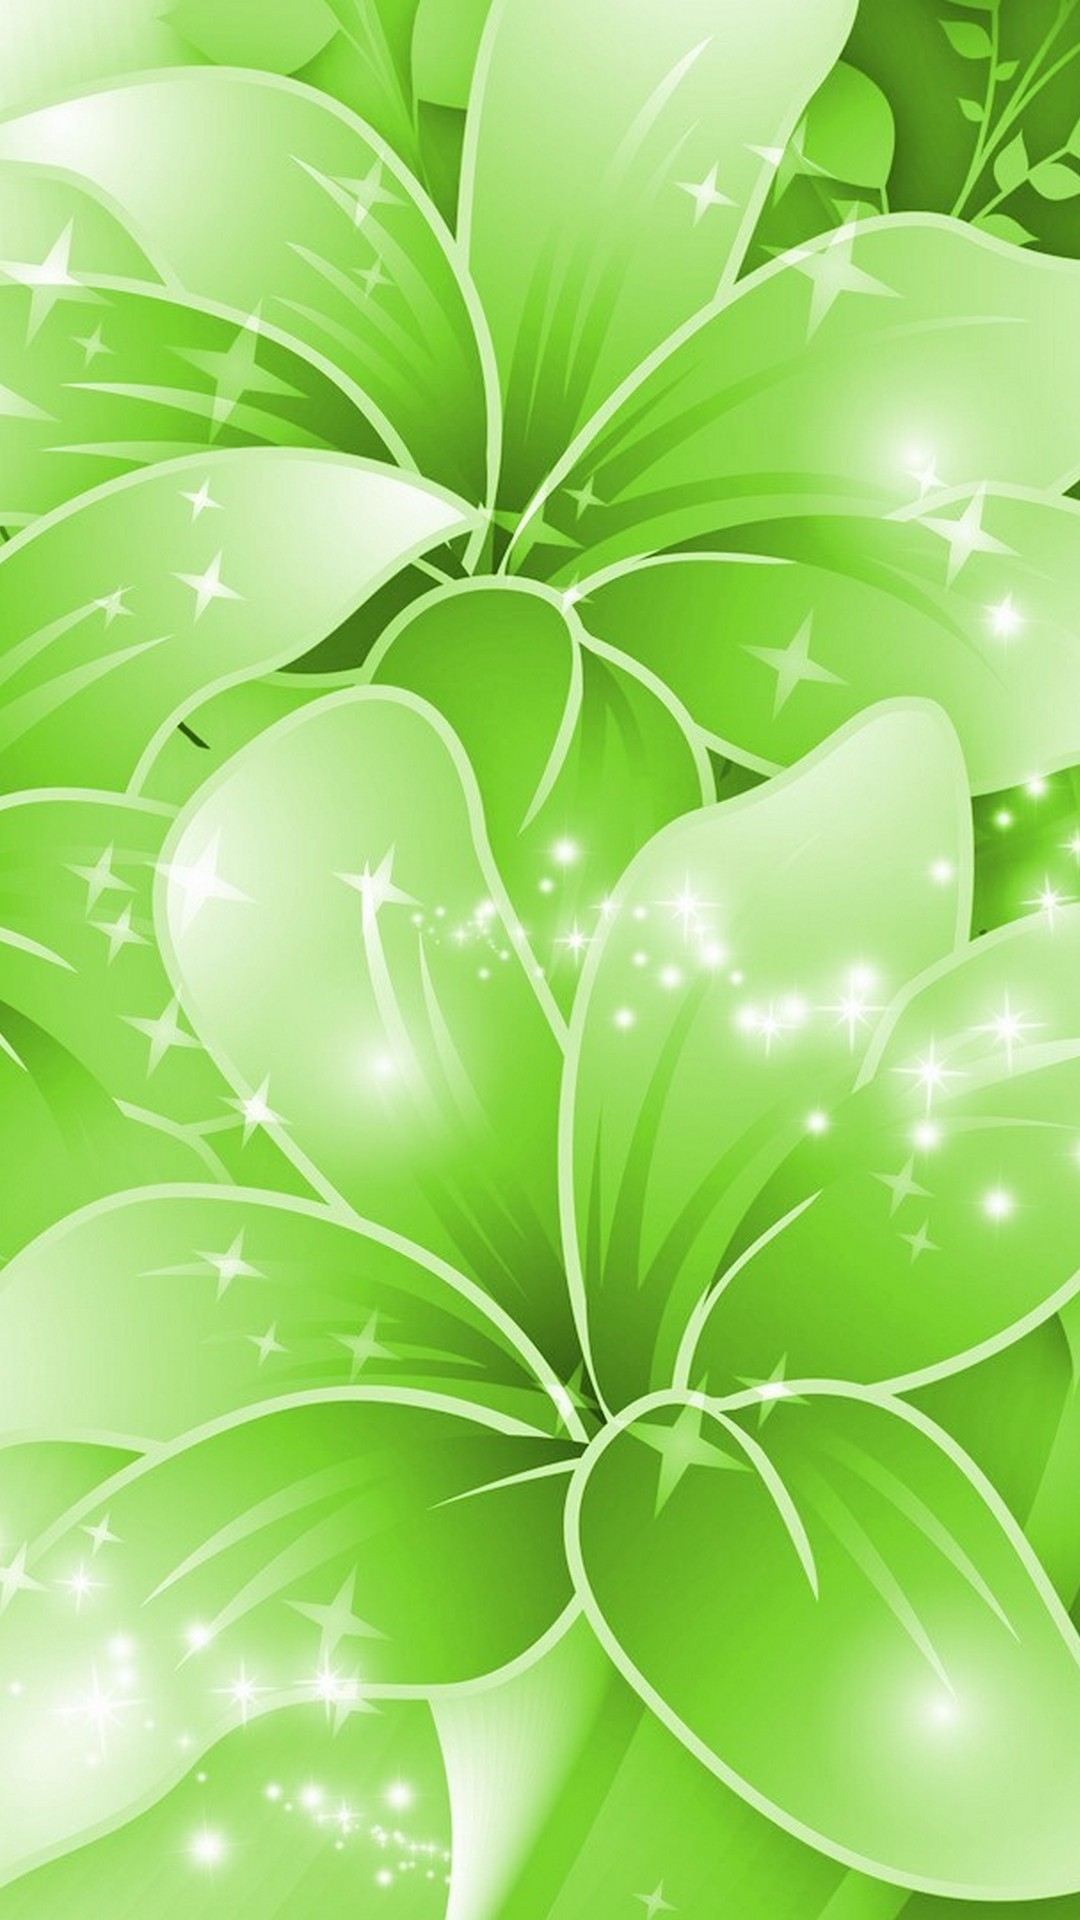 Wallpaper Android Green Colour with image resolution 1080x1920 pixel. You can make this wallpaper for your Android backgrounds, Tablet, Smartphones Screensavers and Mobile Phone Lock Screen